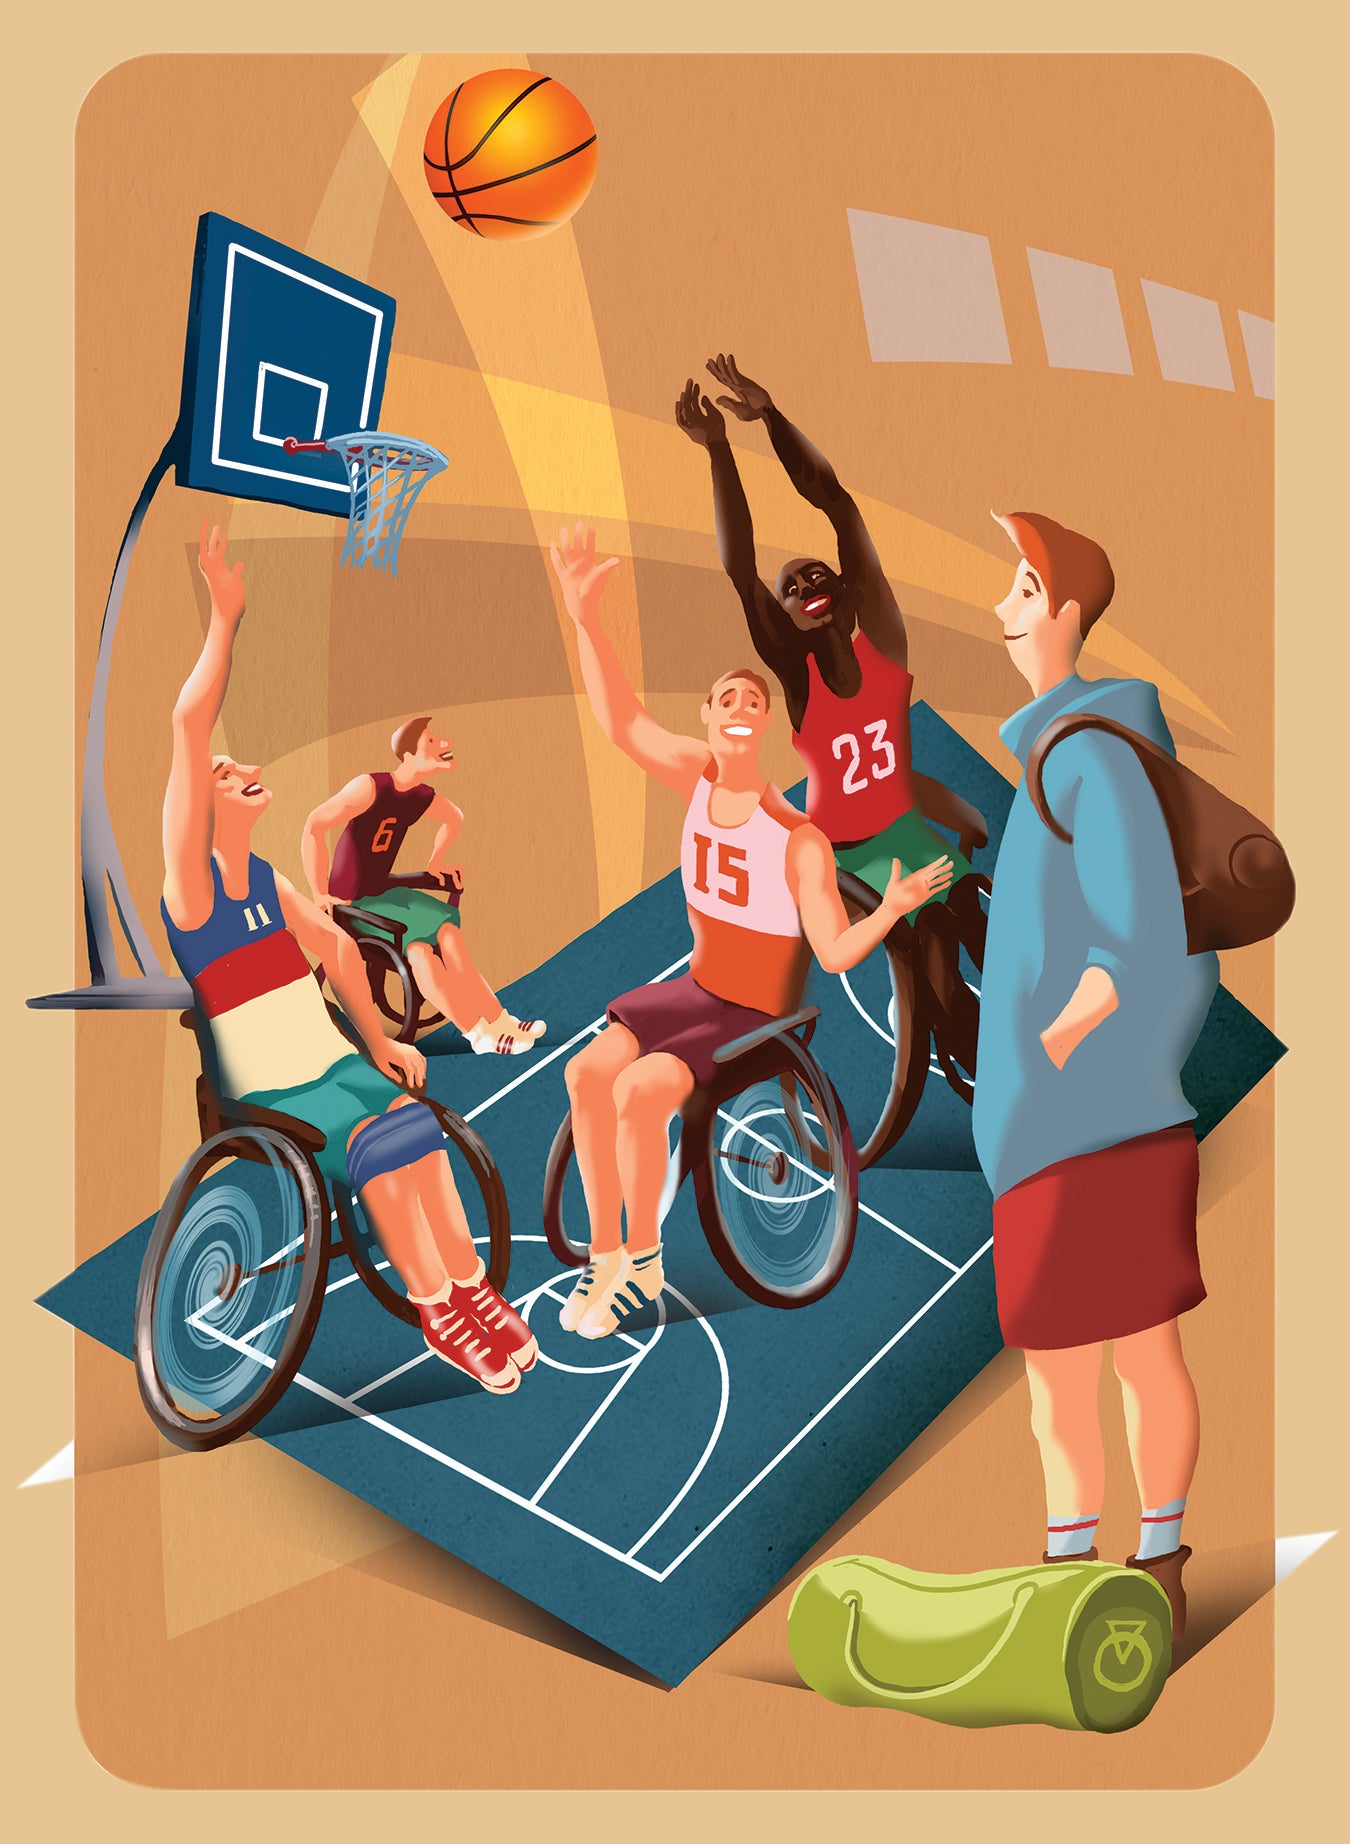 A redhead watches as a group of people in wheelchairs play basketball.